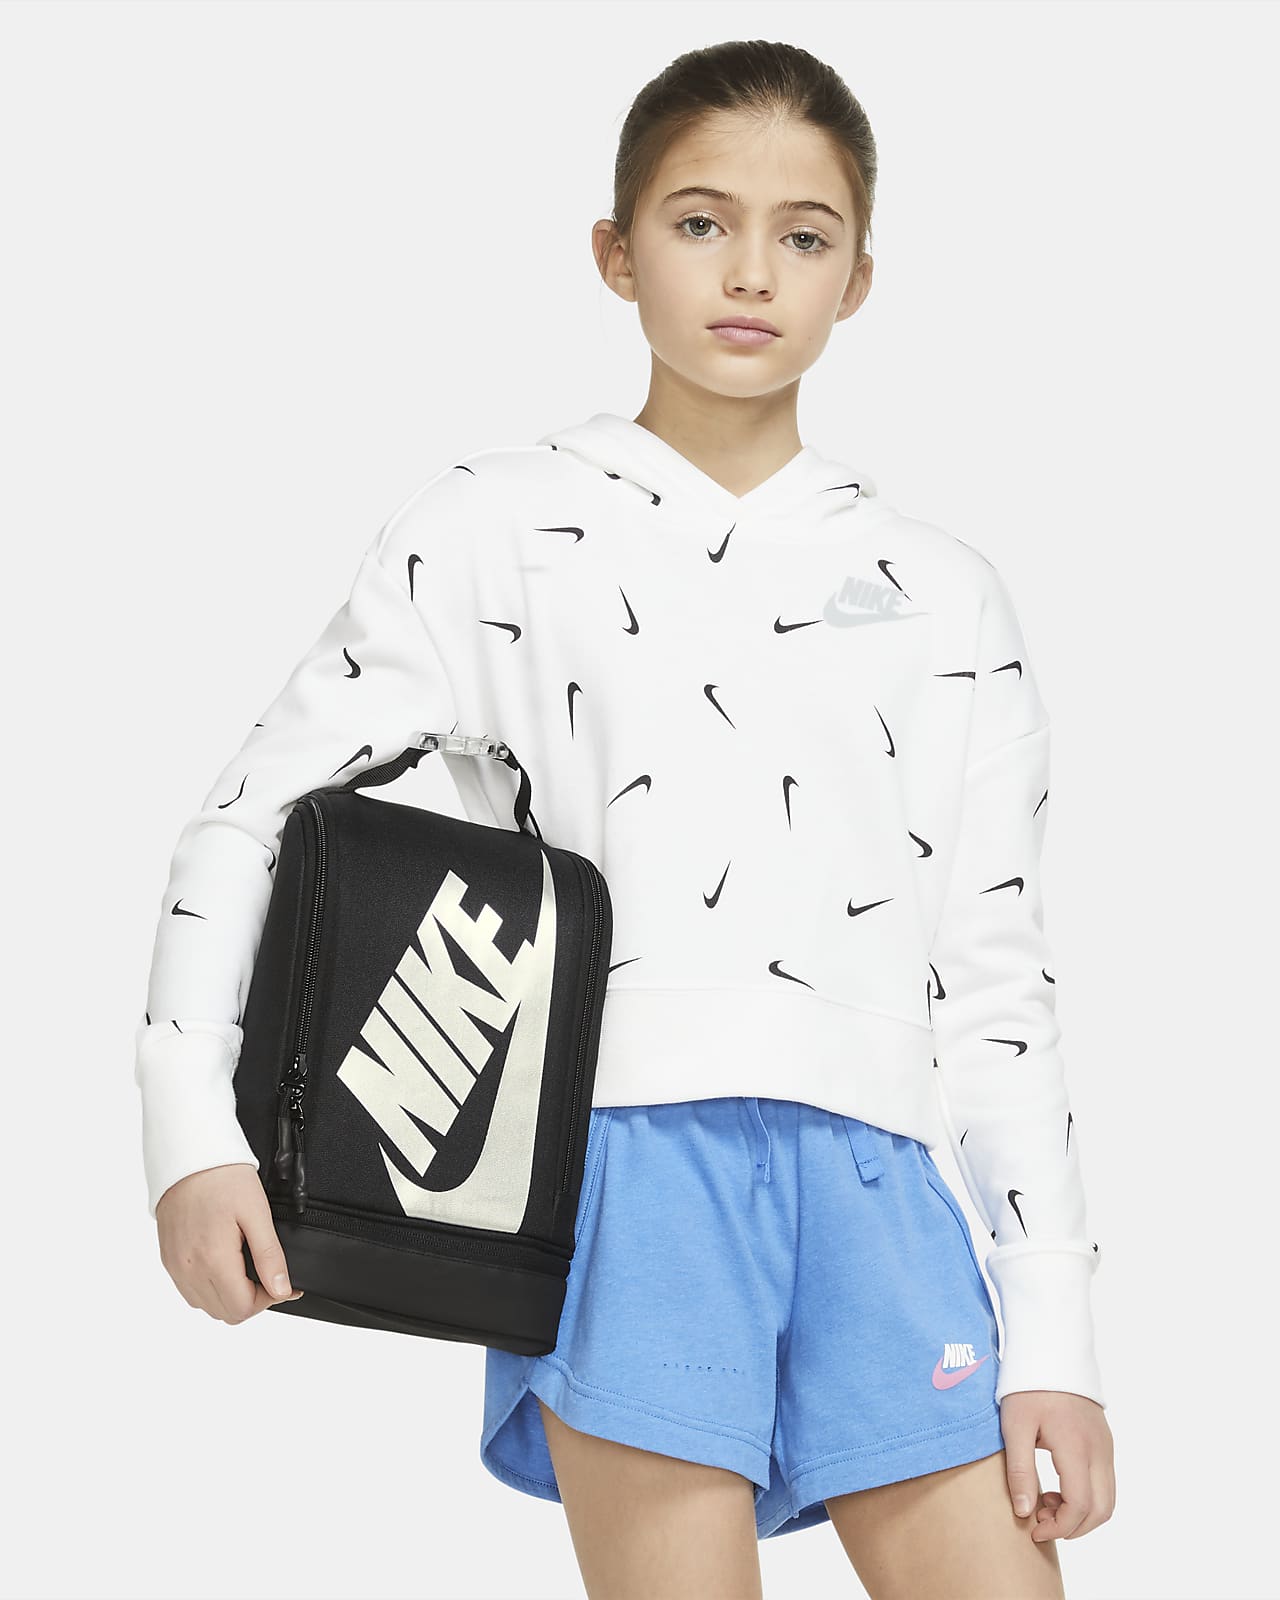 Nike Insulated Lunch Tote Bag